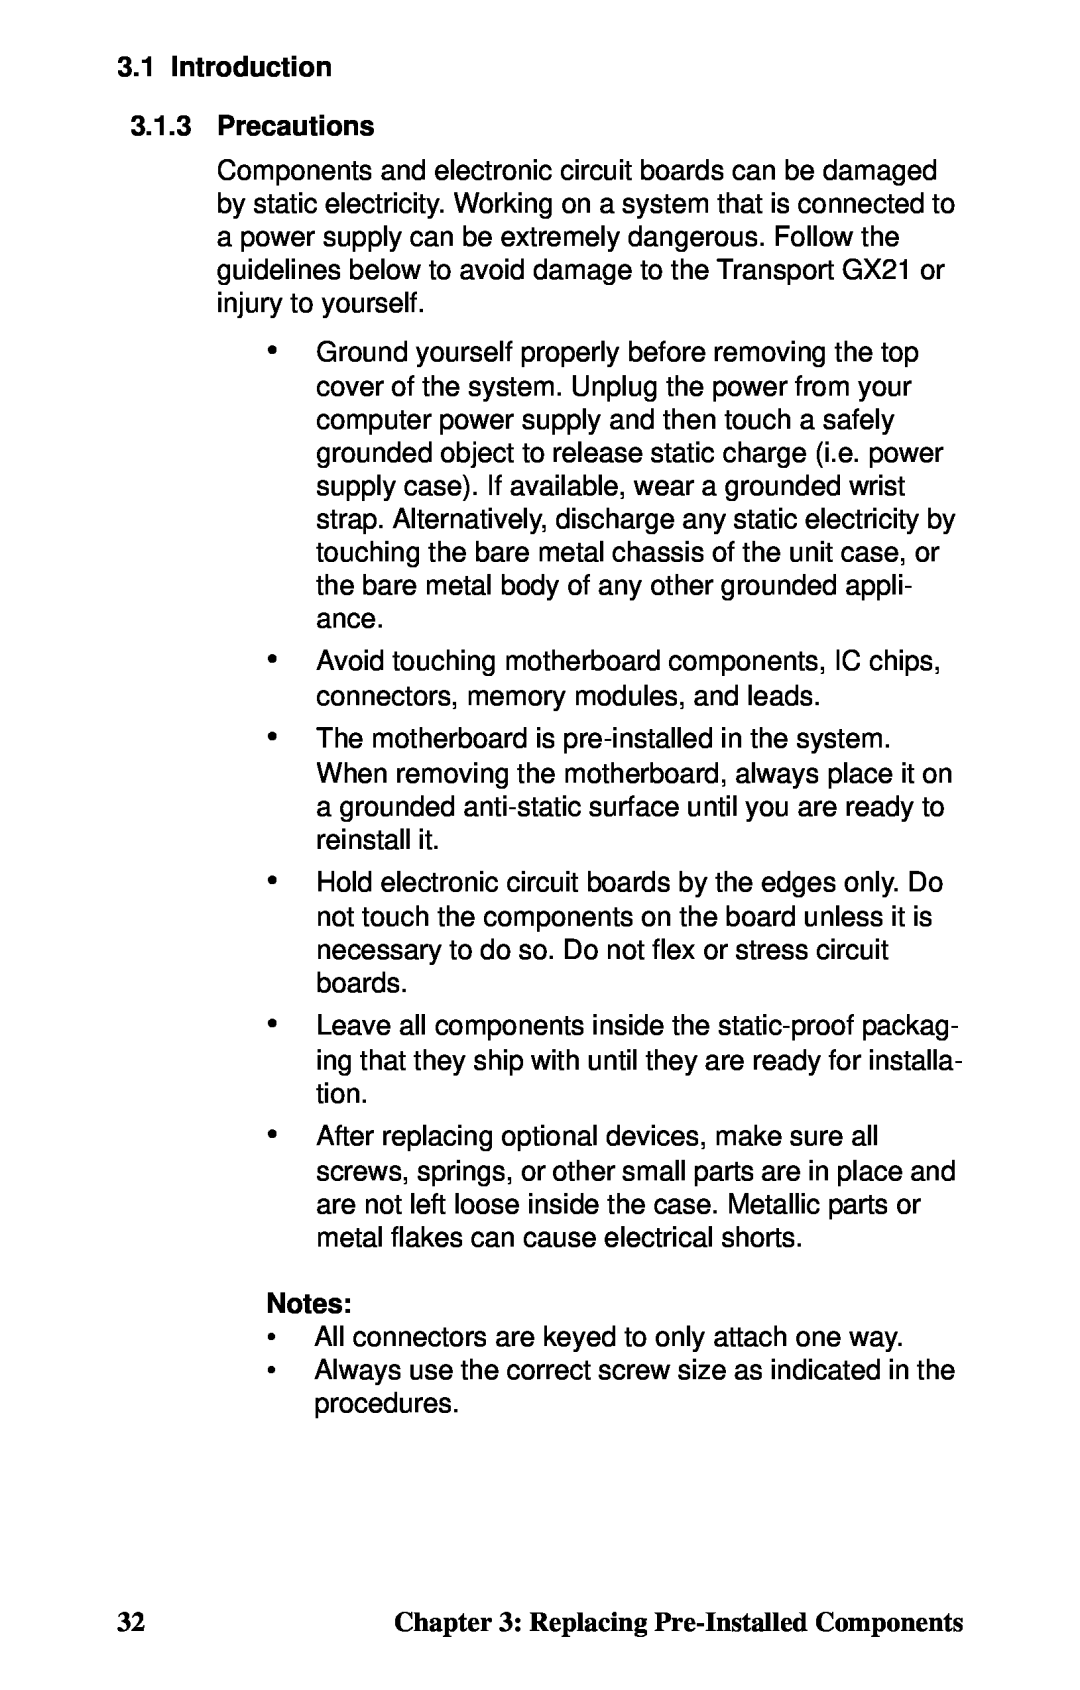 Tyan Computer B5102, GX21 manual Introduction 3.1.3 Precautions, Replacing Pre-Installed Components 